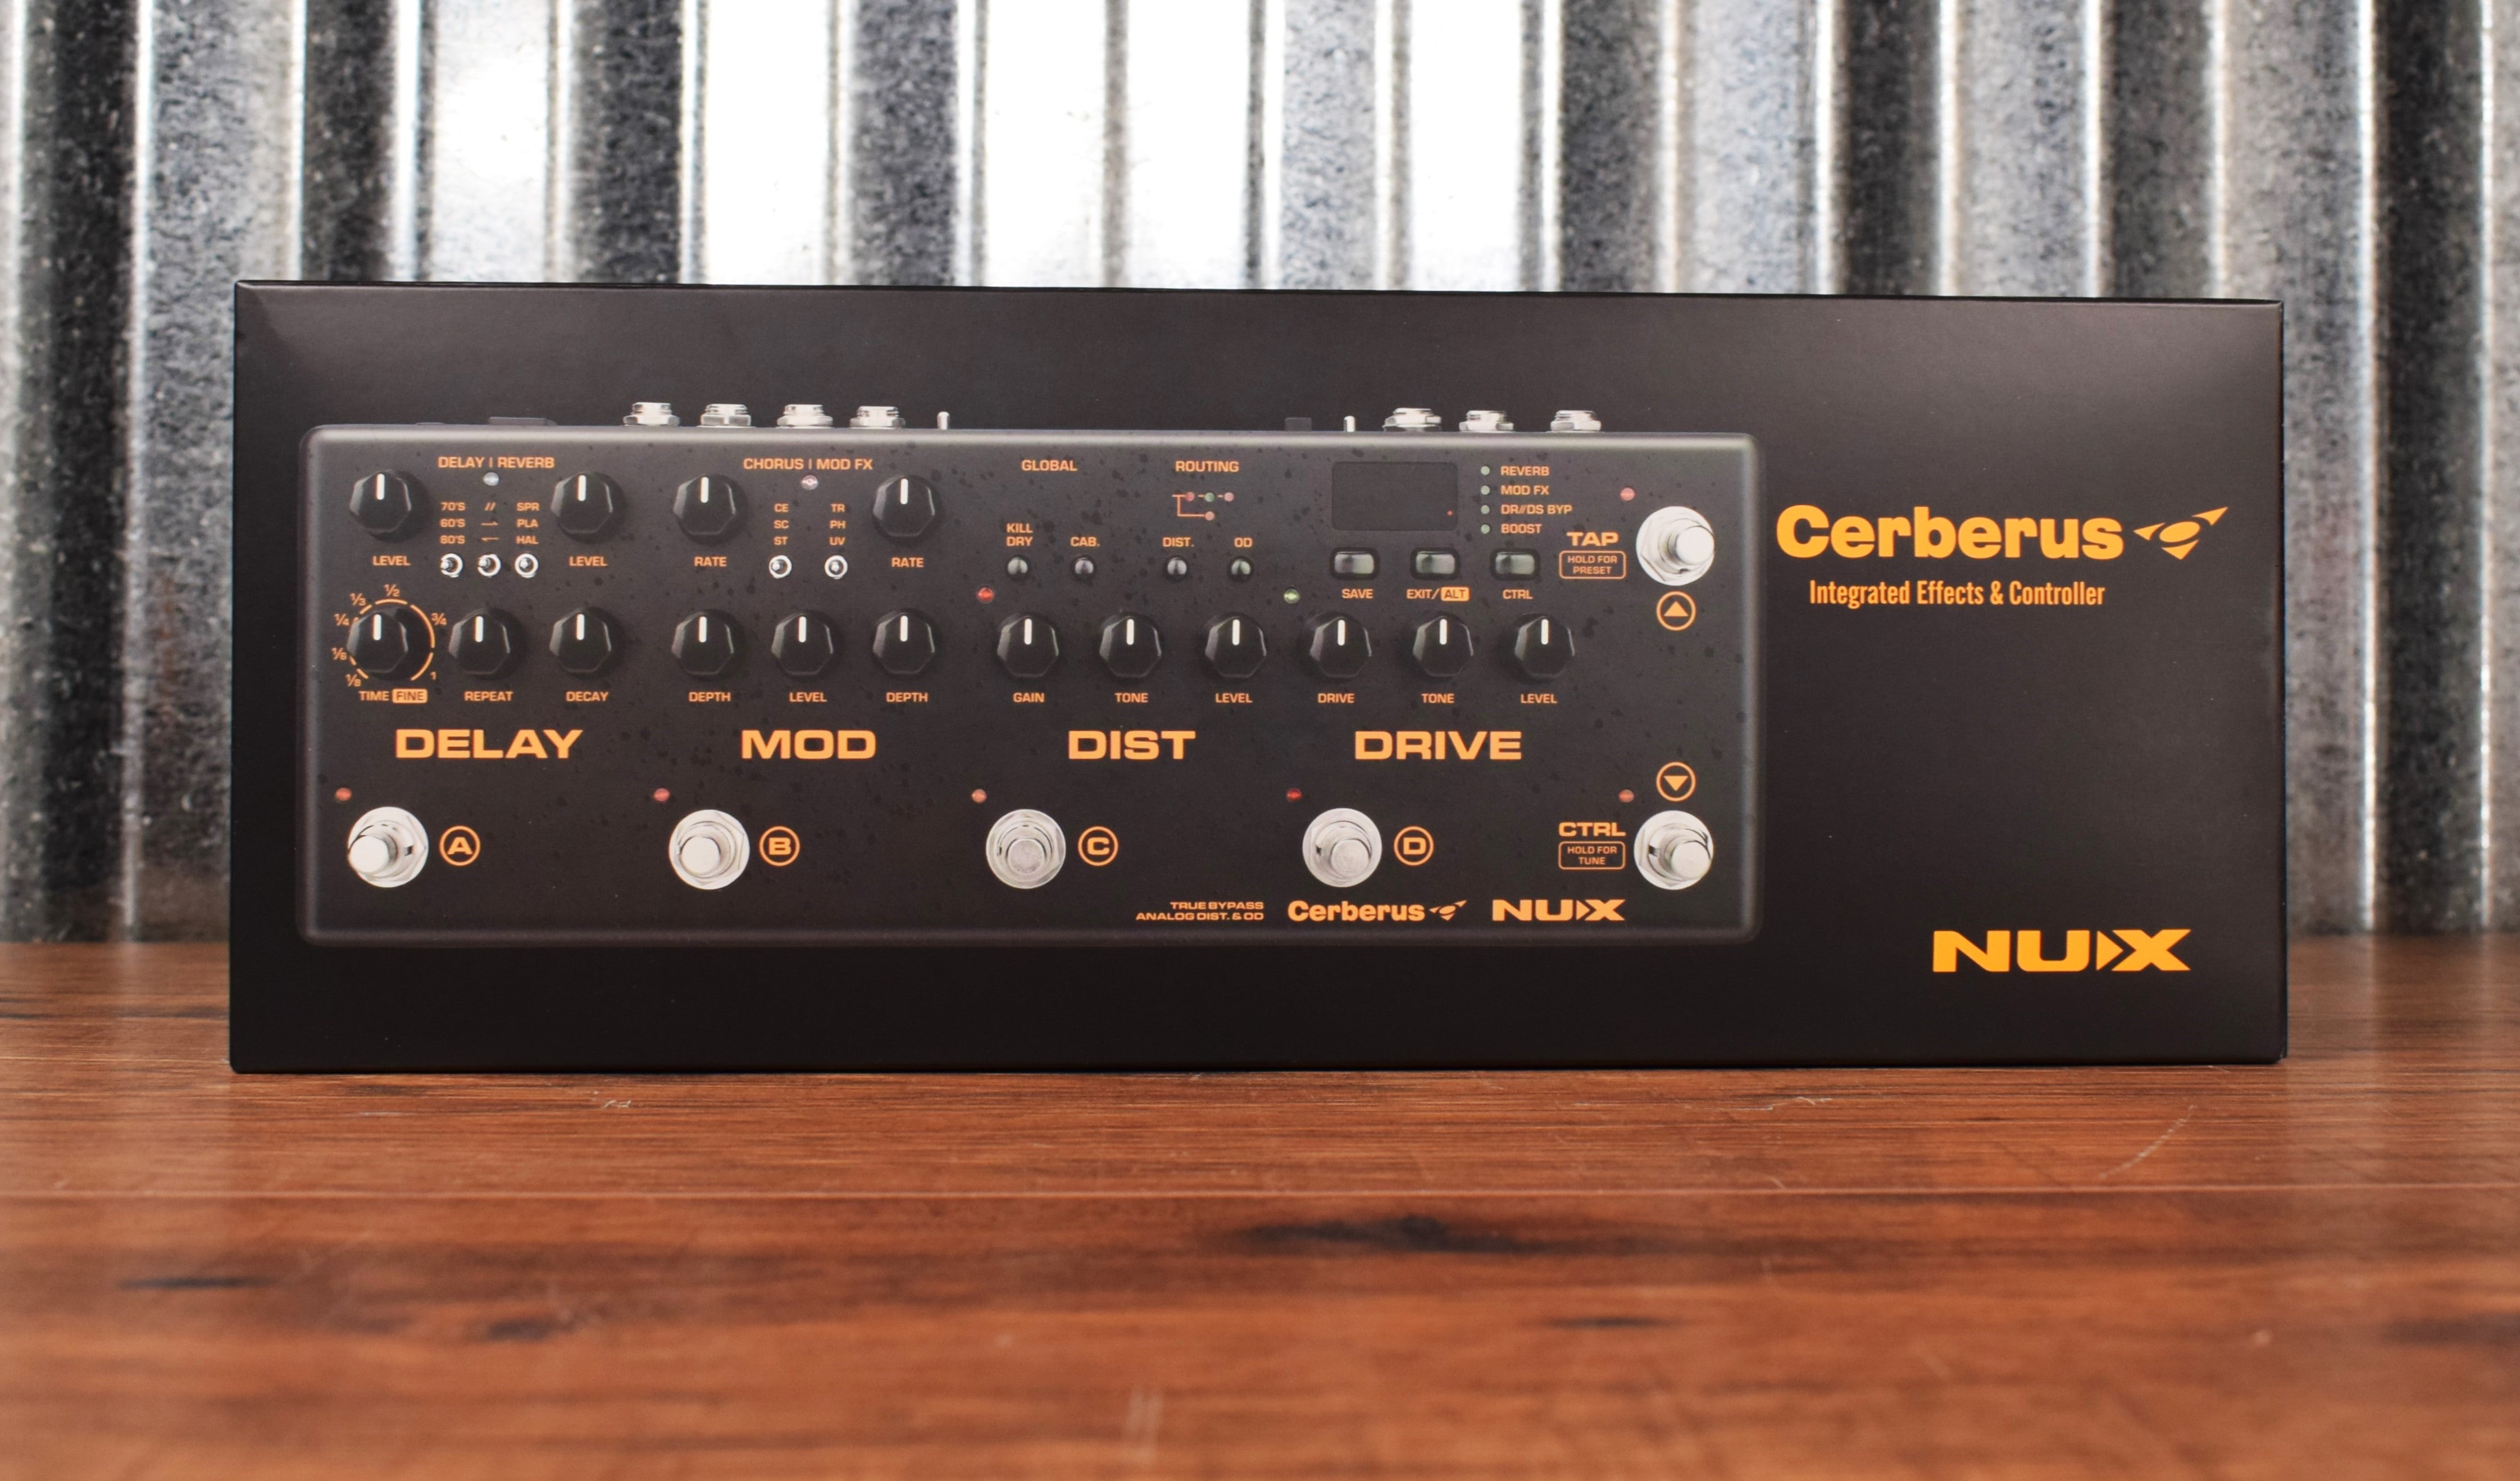 NUX Cerberus Programmable Multi-Effect Delay Modulation Distortion Ove –  Specialty Traders